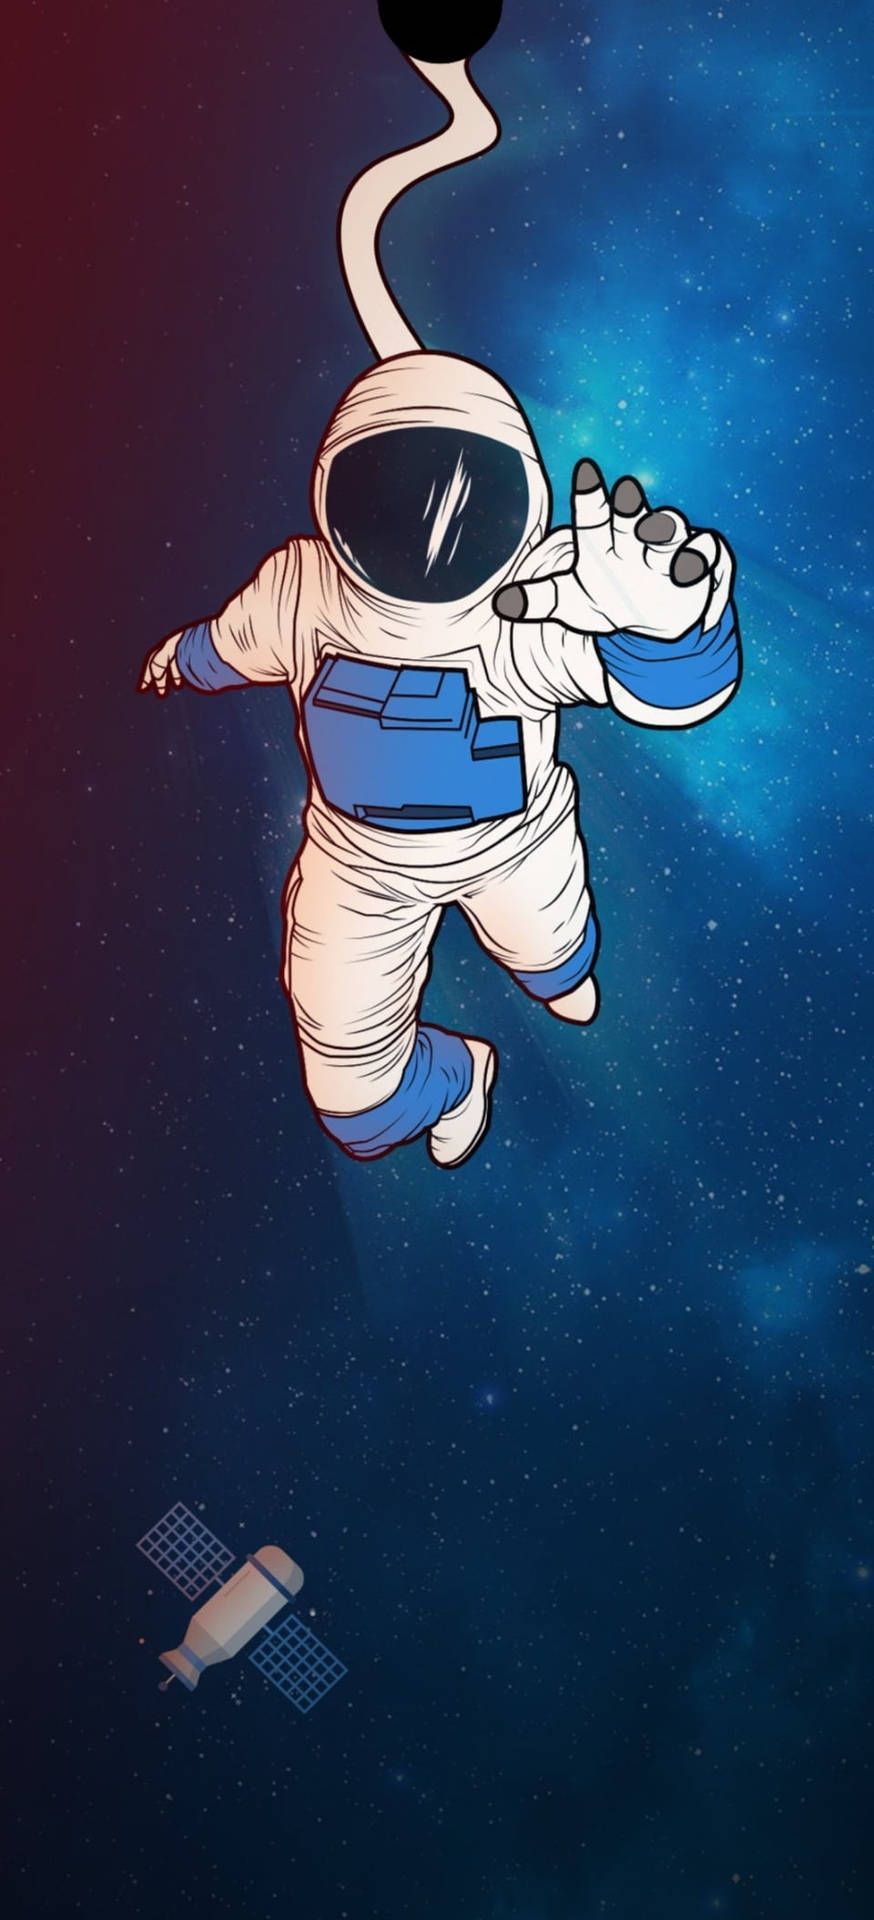 100+] Spaceman Backgrounds